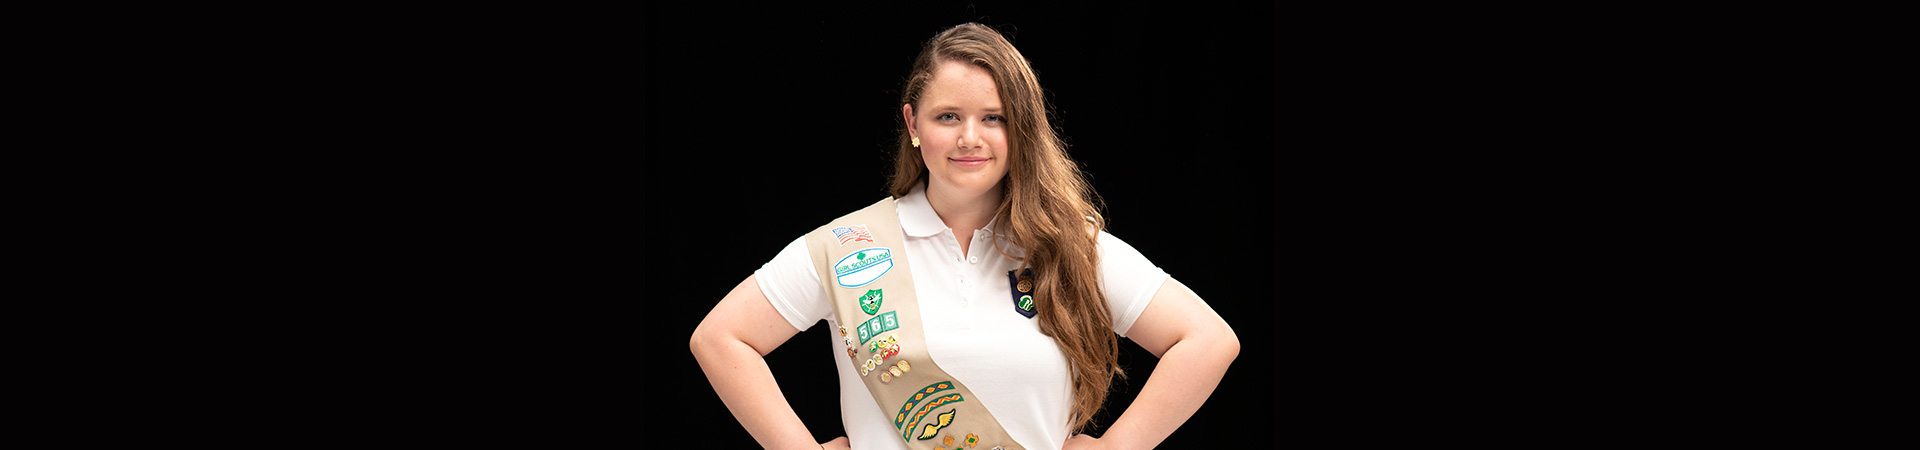  girl scout in sash standing with hands on hips 